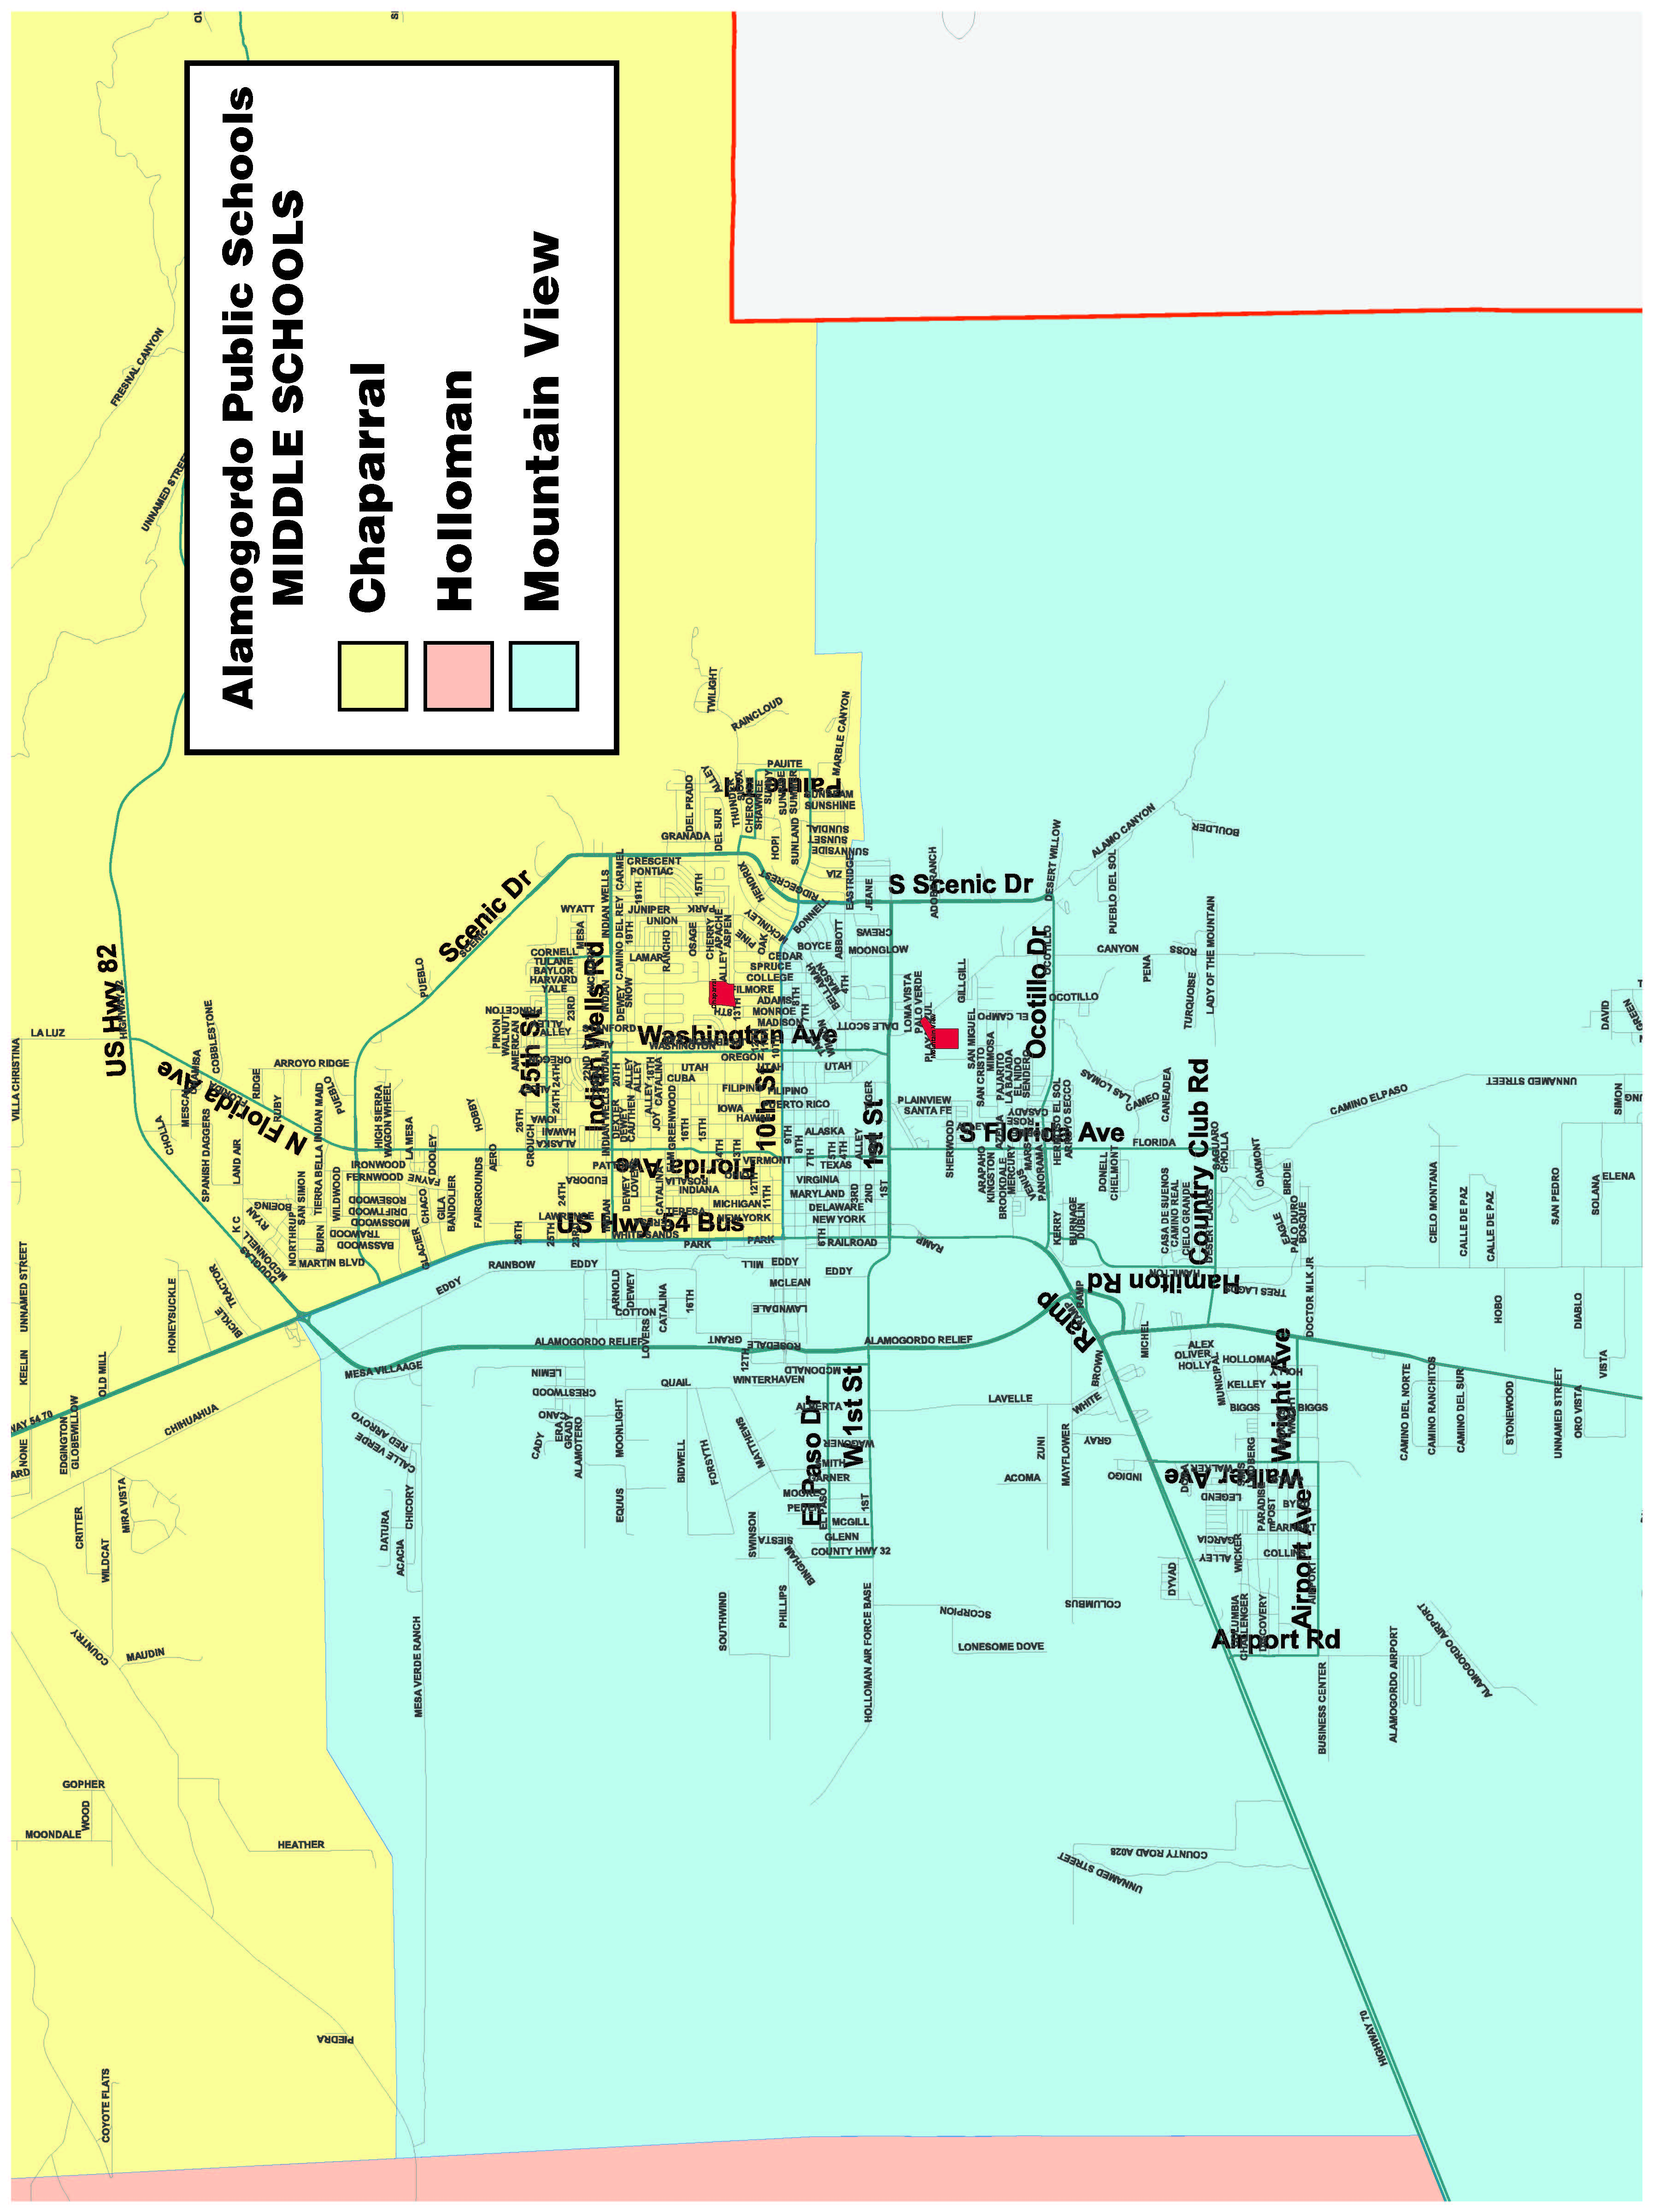 Middle School Zone Map